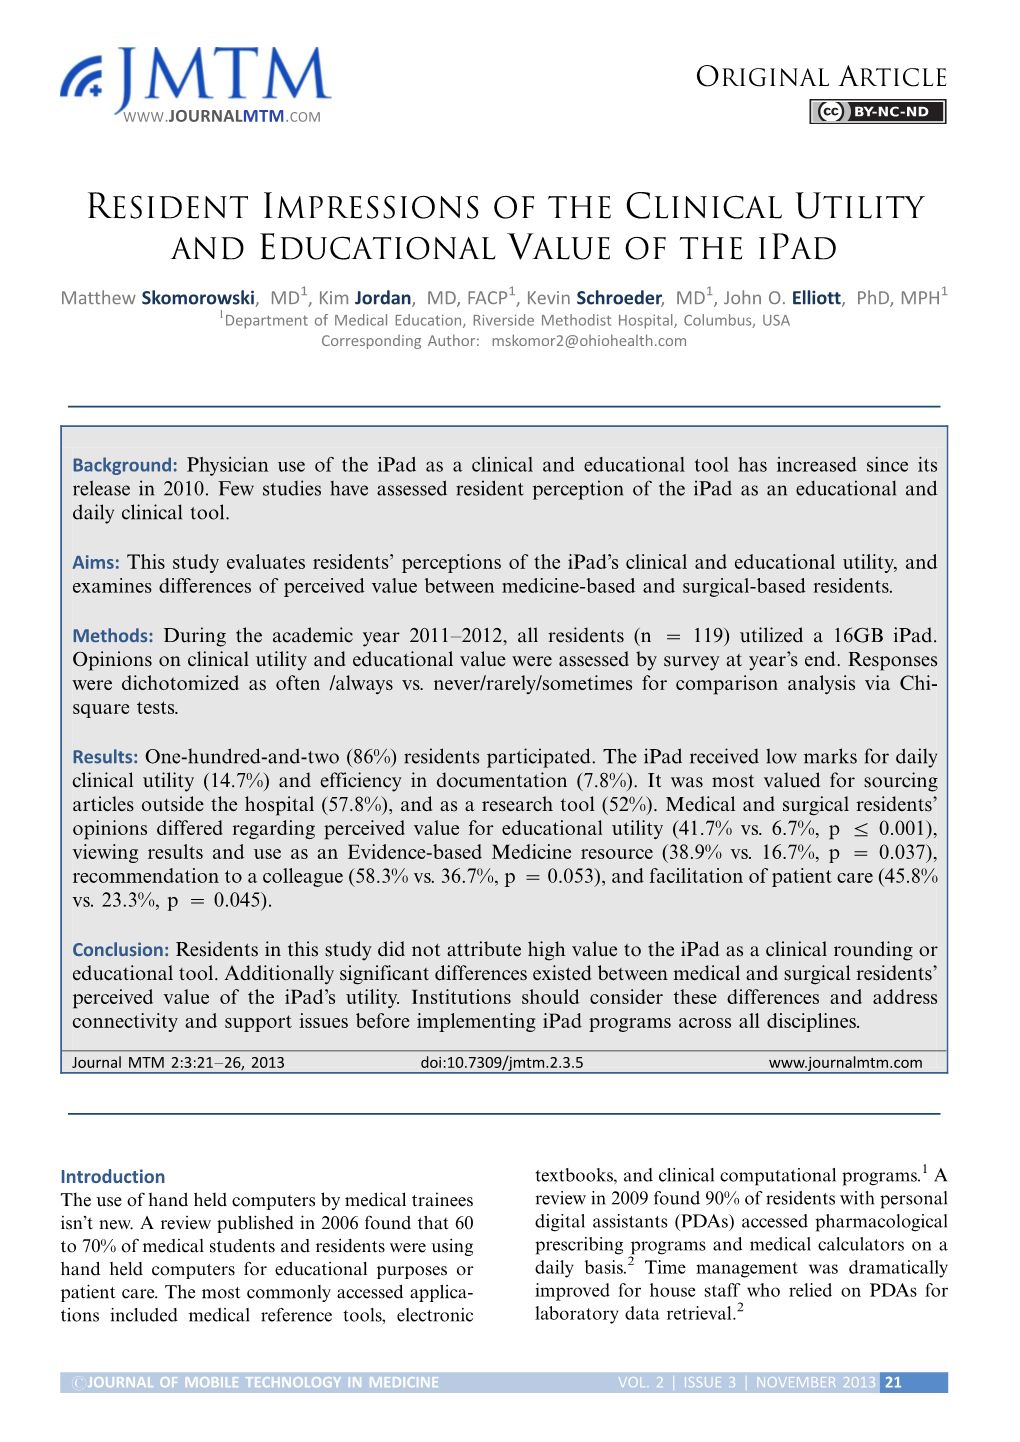 Resident Impressions of the Clinical Utility and Educational Value of the Ipad